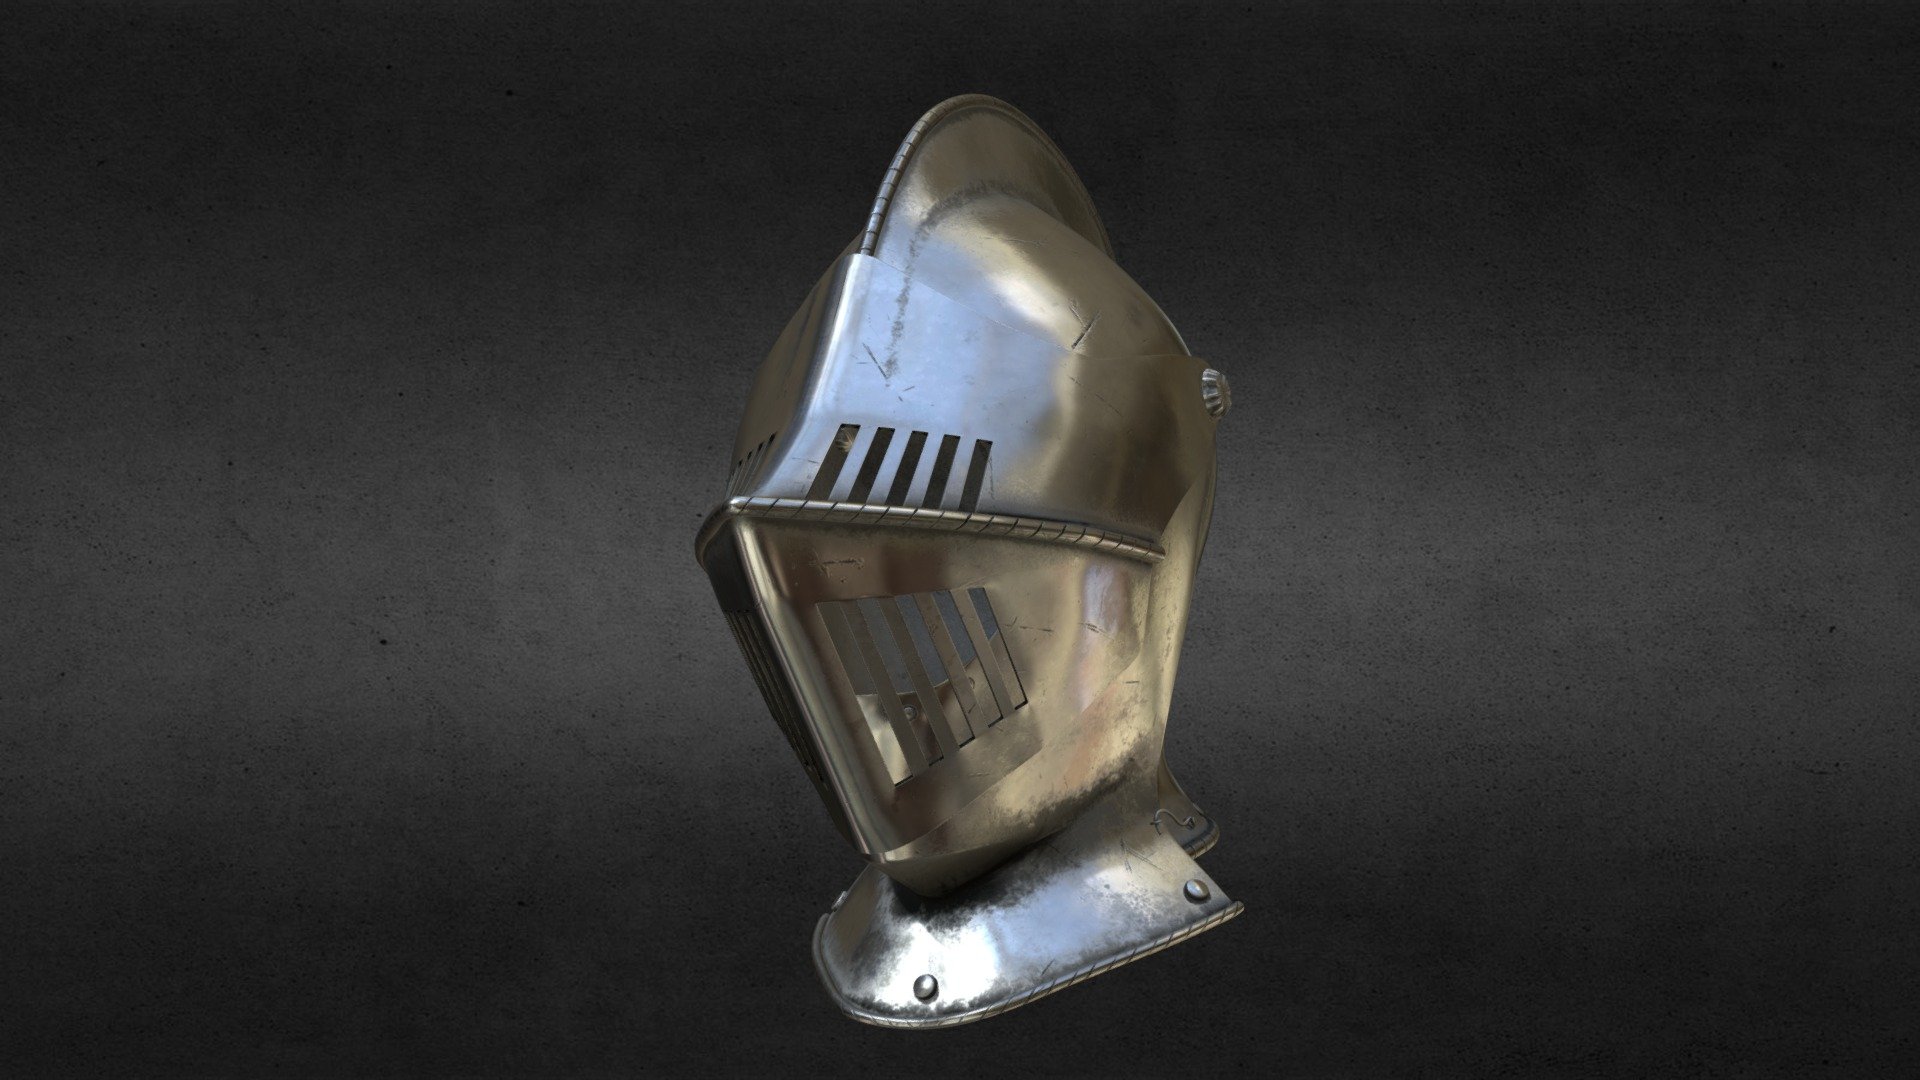 3D Model of Medieval Knight Armet Helmet with visor and ornaments. Used for tournaments or battlefields. Historical accuracy. Adapted to a sample human head with padded coif 3d model